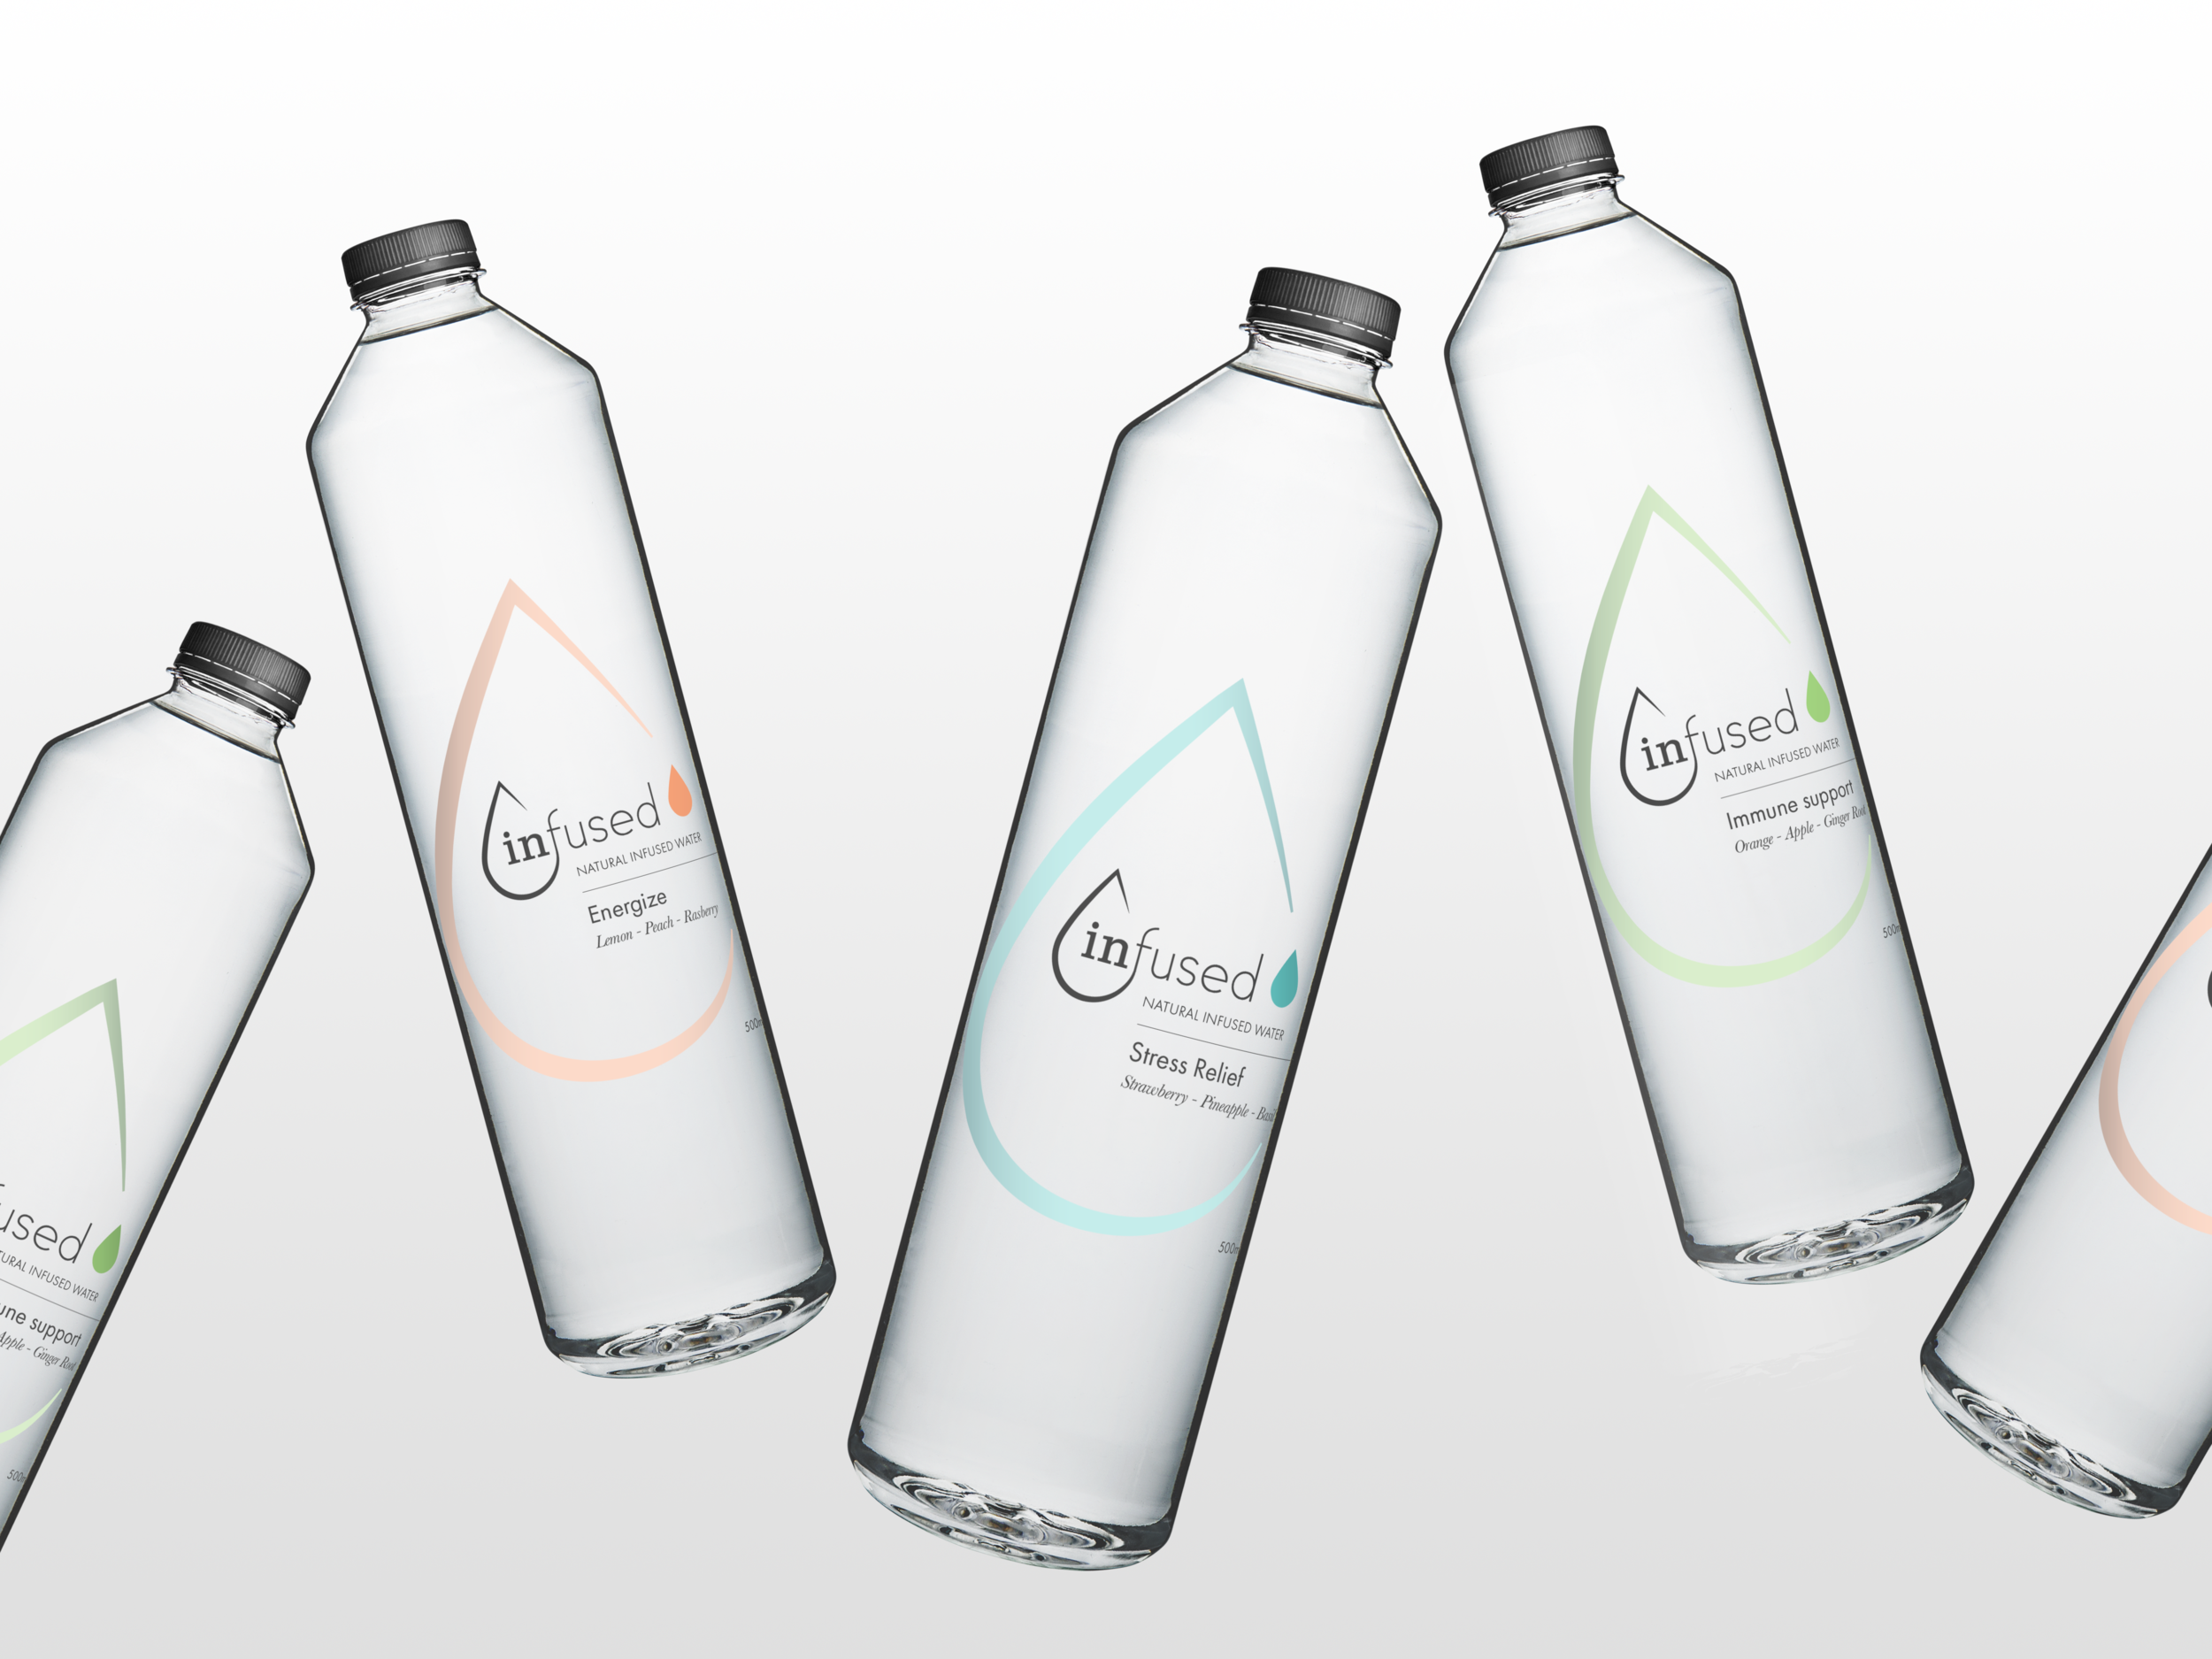 Agency Concept for Modern and Minimalist for Modern and Minimalist Twist on Bottled Water